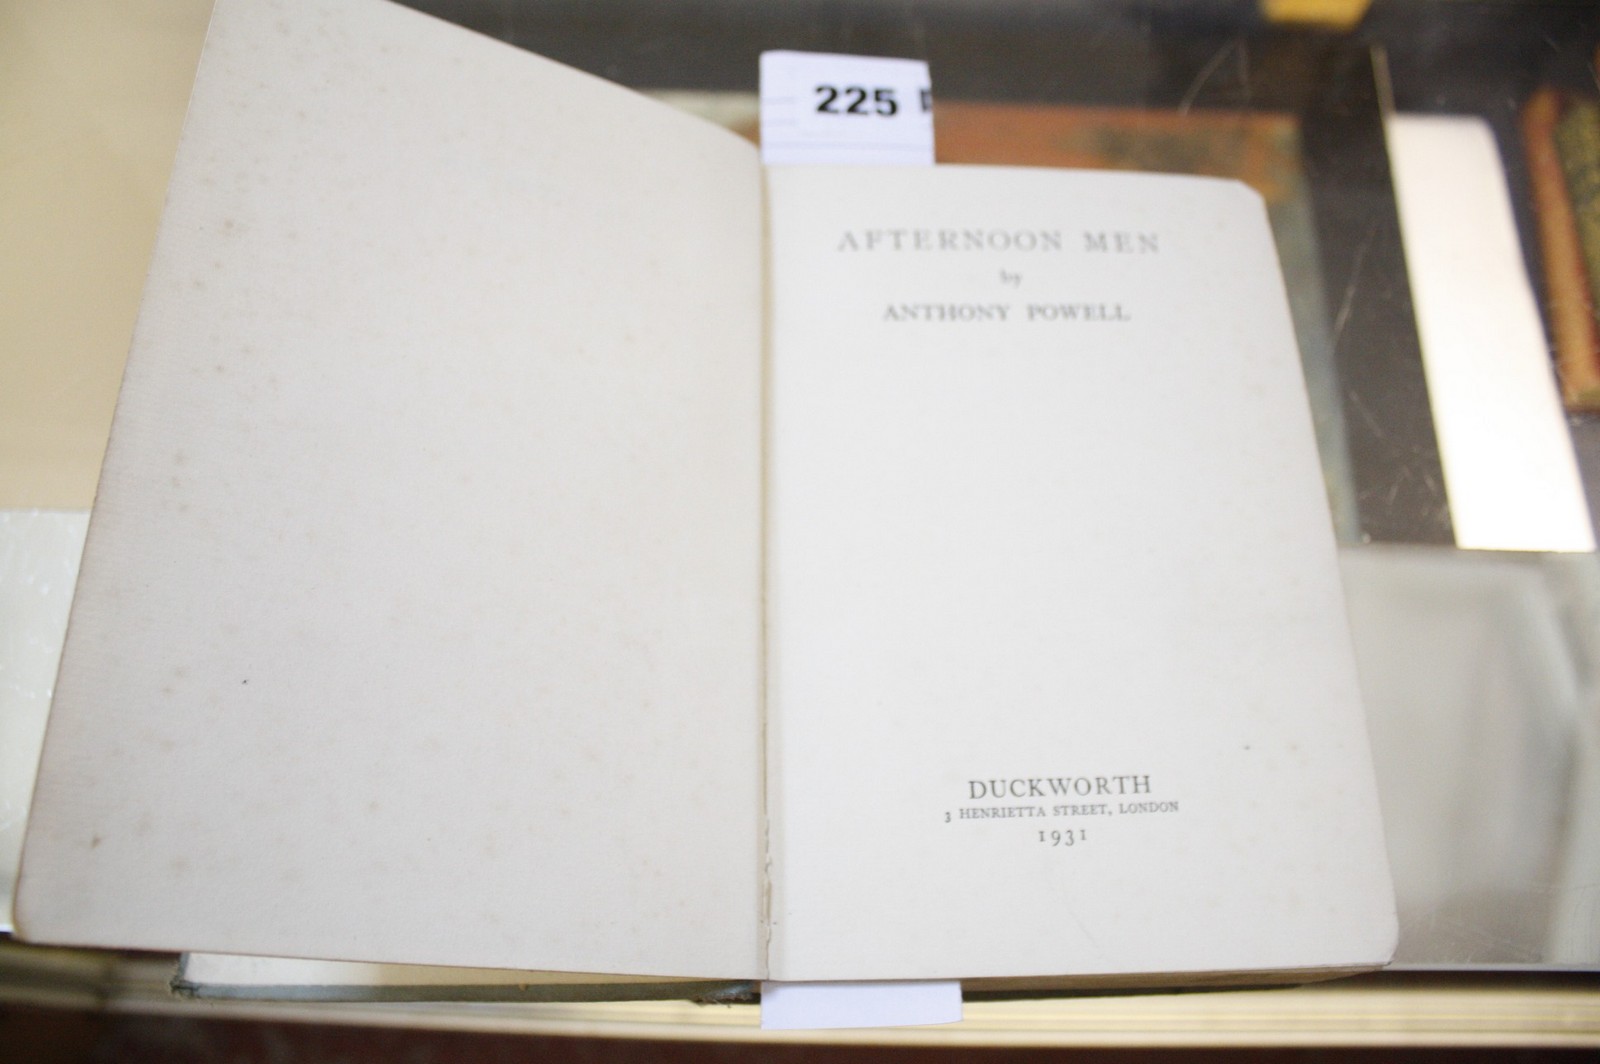 [BOOKS] Anthony Powell, Afternoon Men, 1st Edition, Duckworth, 1931 - Image 2 of 2